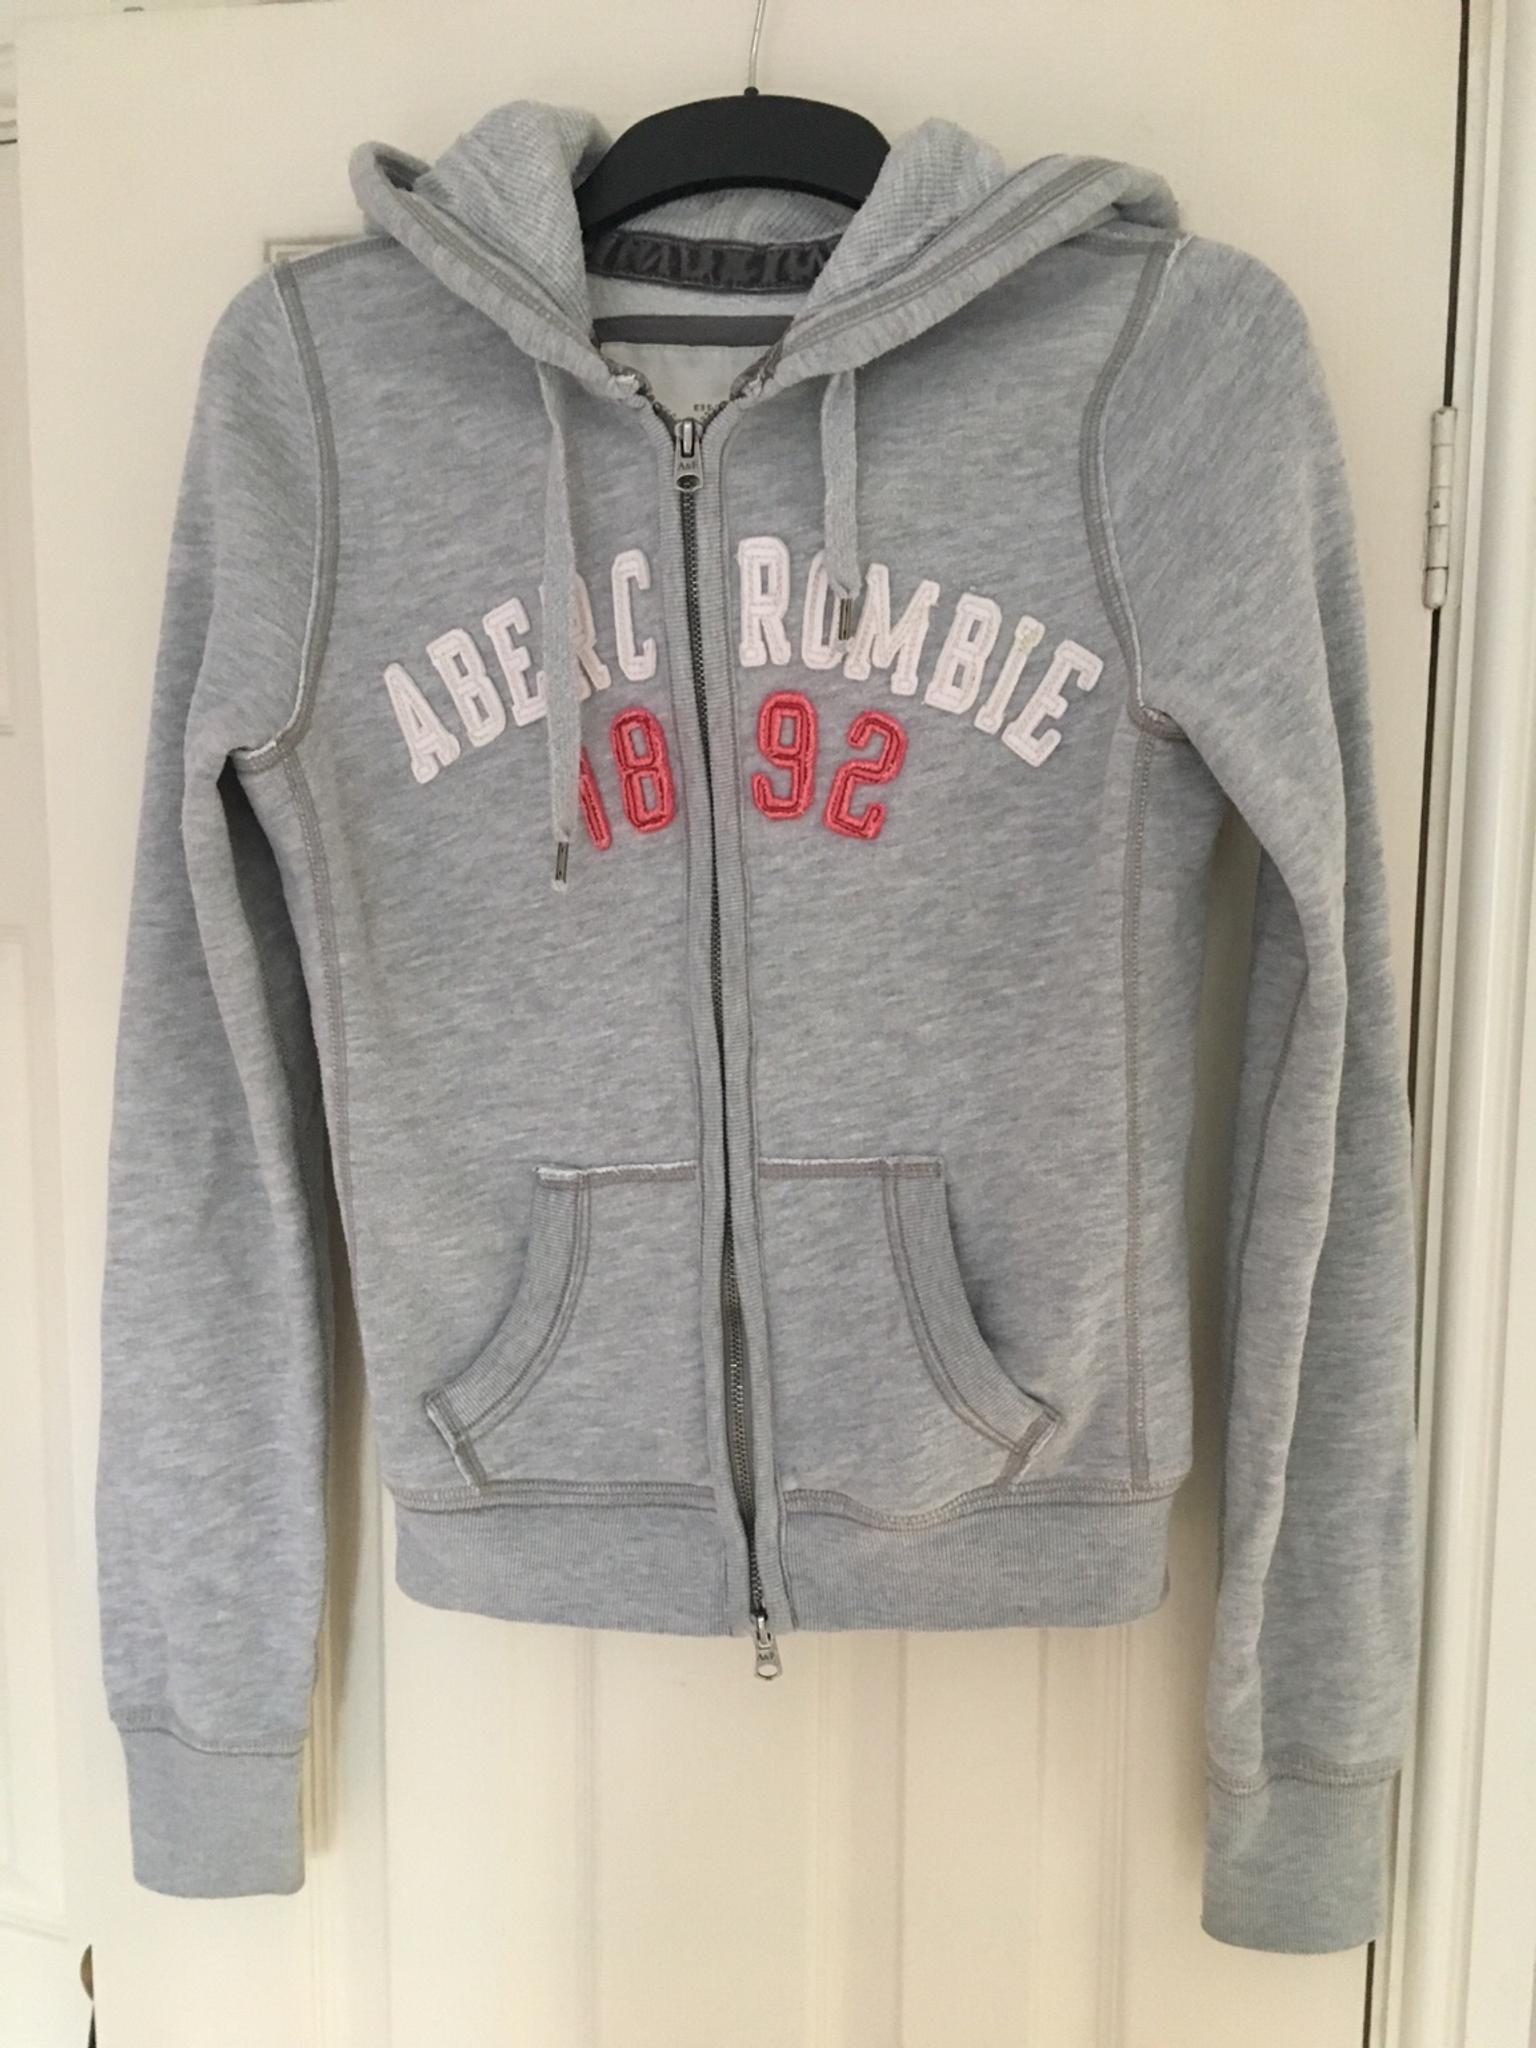 abercrombie and fitch zip hoodie